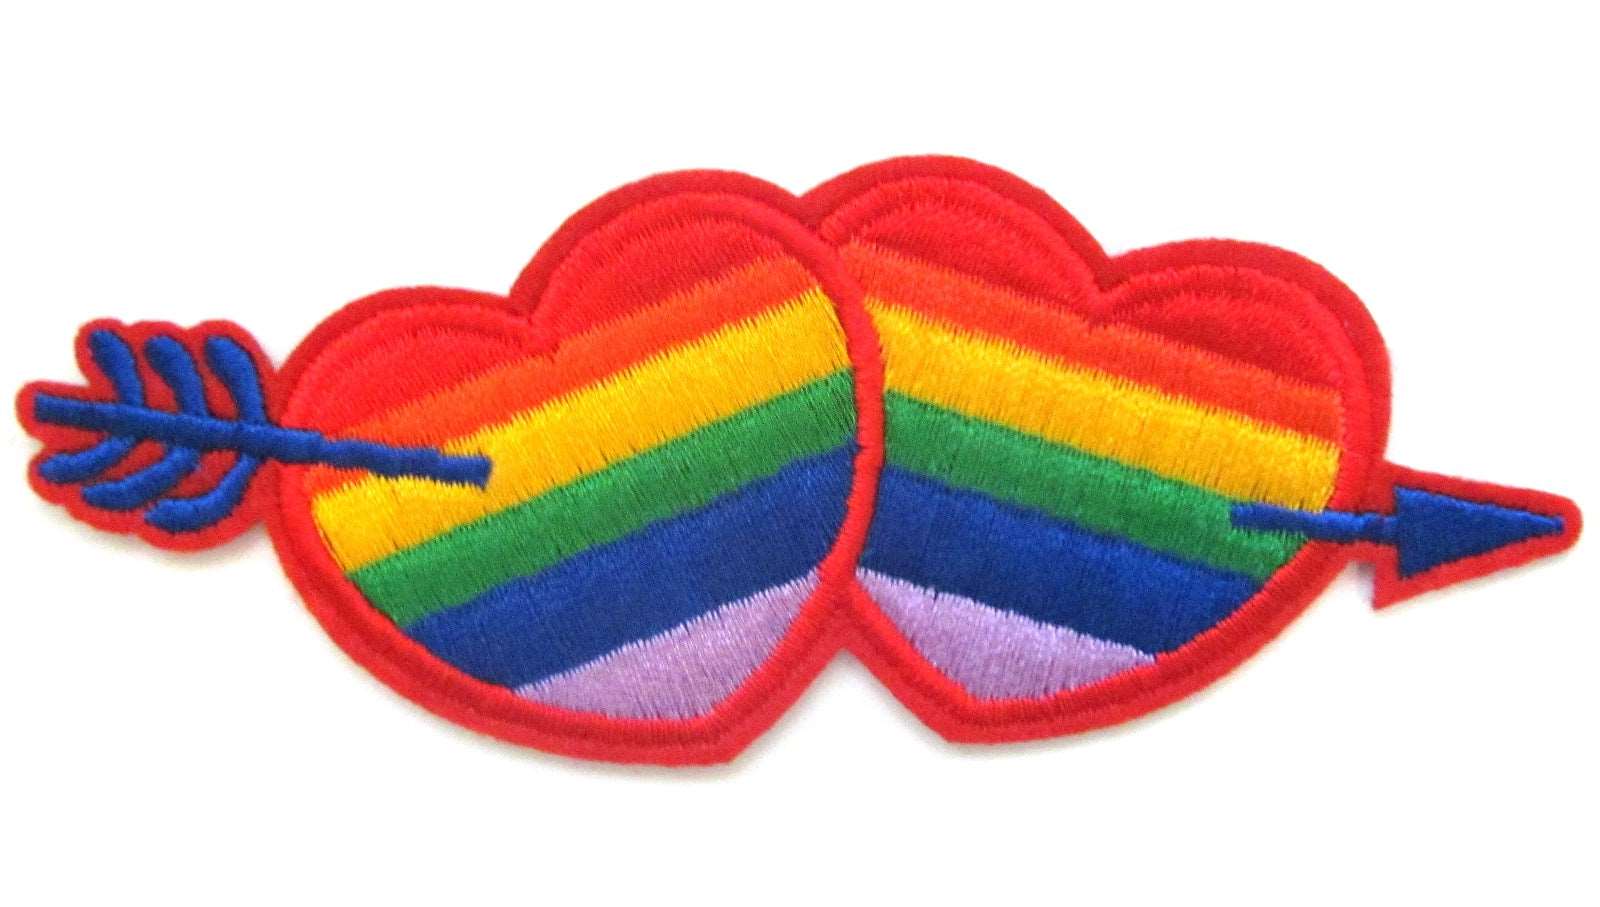 Alice Patches 2.8x2.4 12pcs Pride Rainbow Heart Patches Iron on Embroidered Patches Appliques Machine Embroidery Needlecraft Sewing Girls